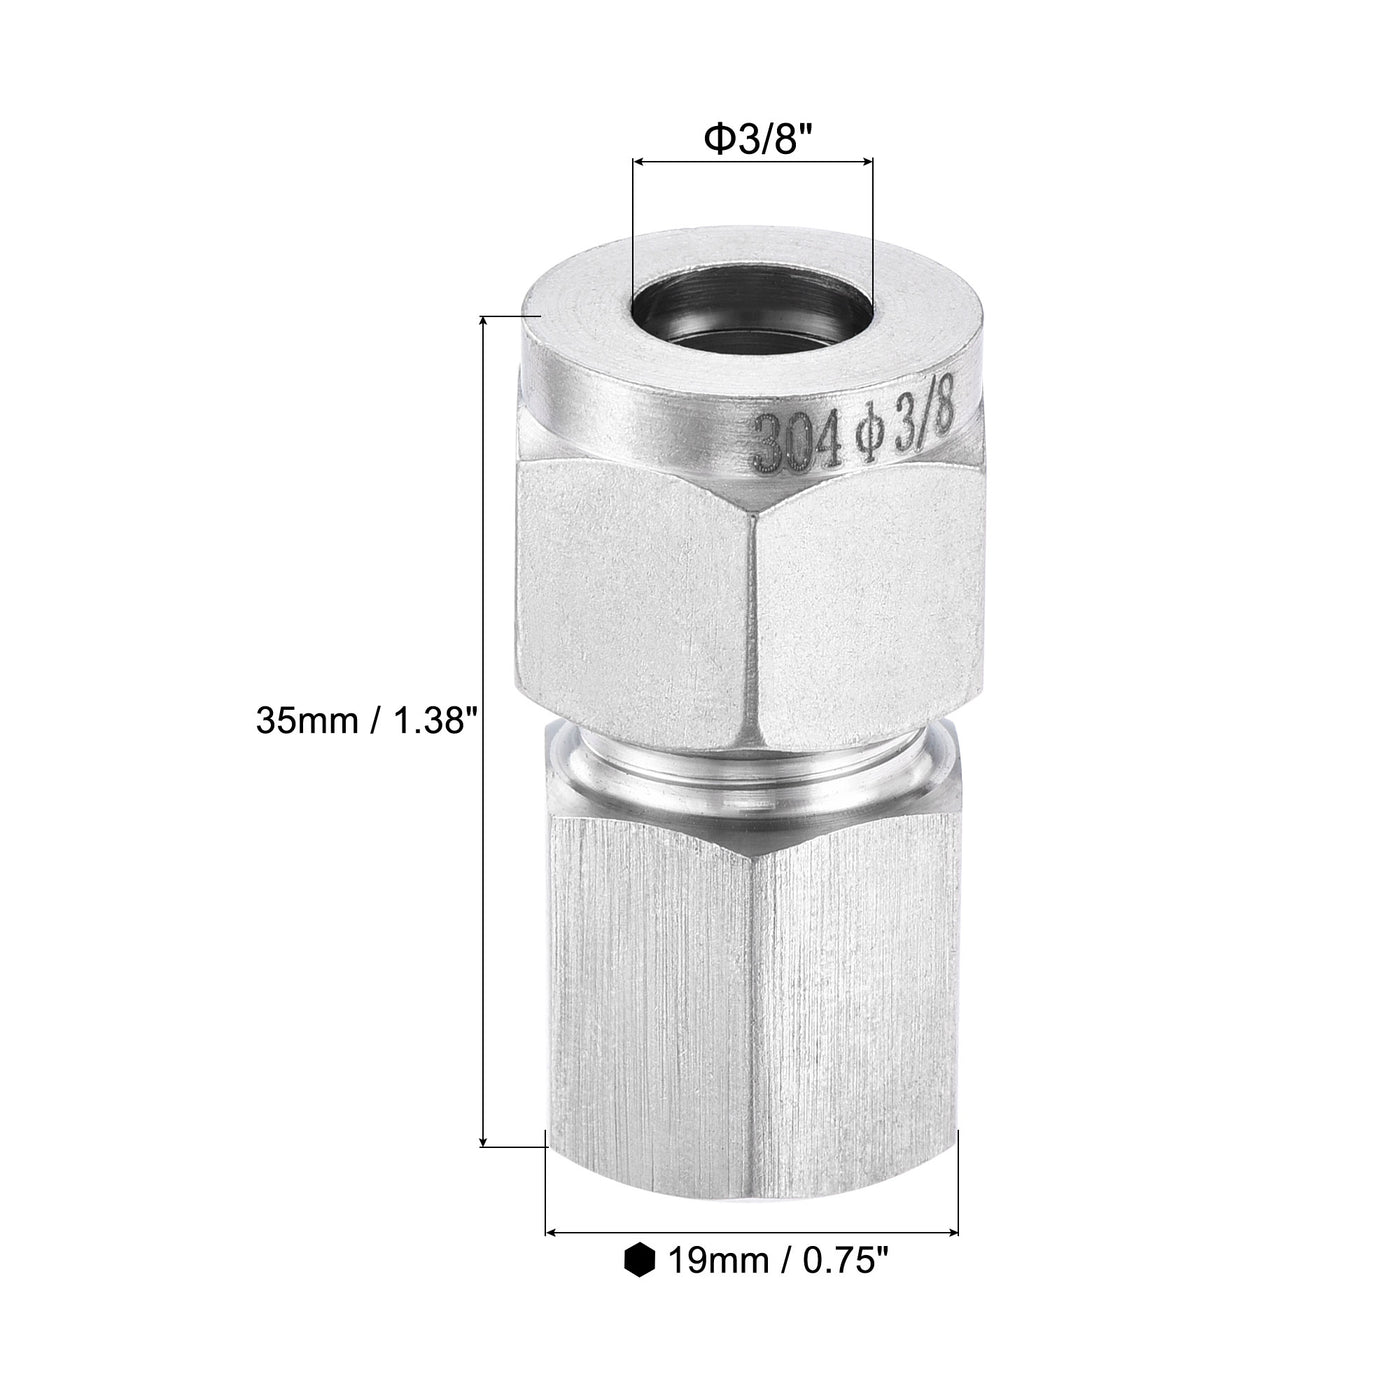 Uxcell Uxcell Compression Tube Fitting 1/4NPT Female Thread x 3/8" Tube OD Straight Coupling Adapter 304 Stainless Steel